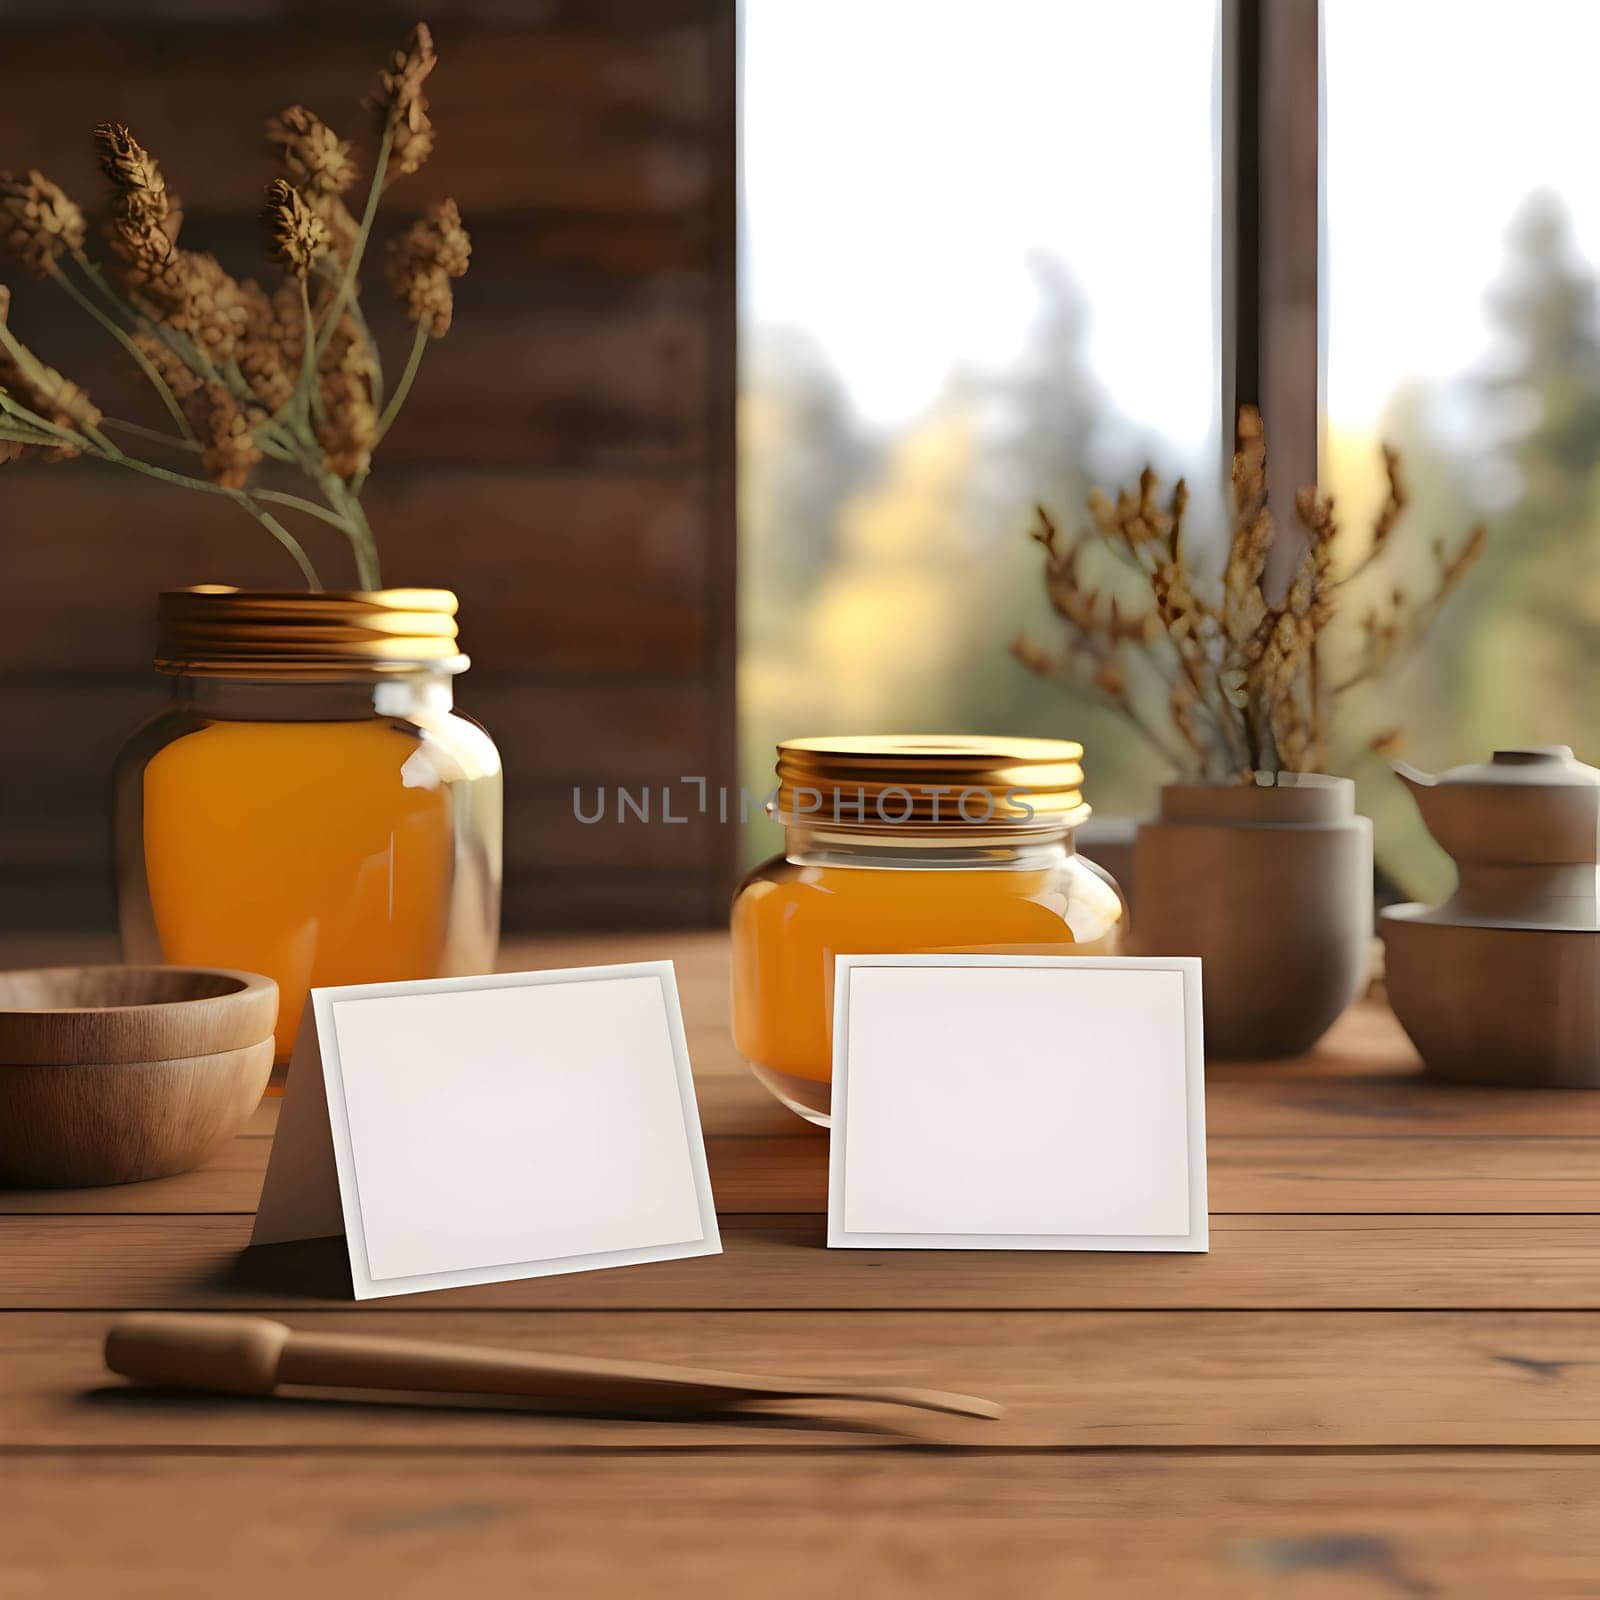 Two white cards placed amidst orange juice jars and a view through the window create a refreshing and vibrant scene.